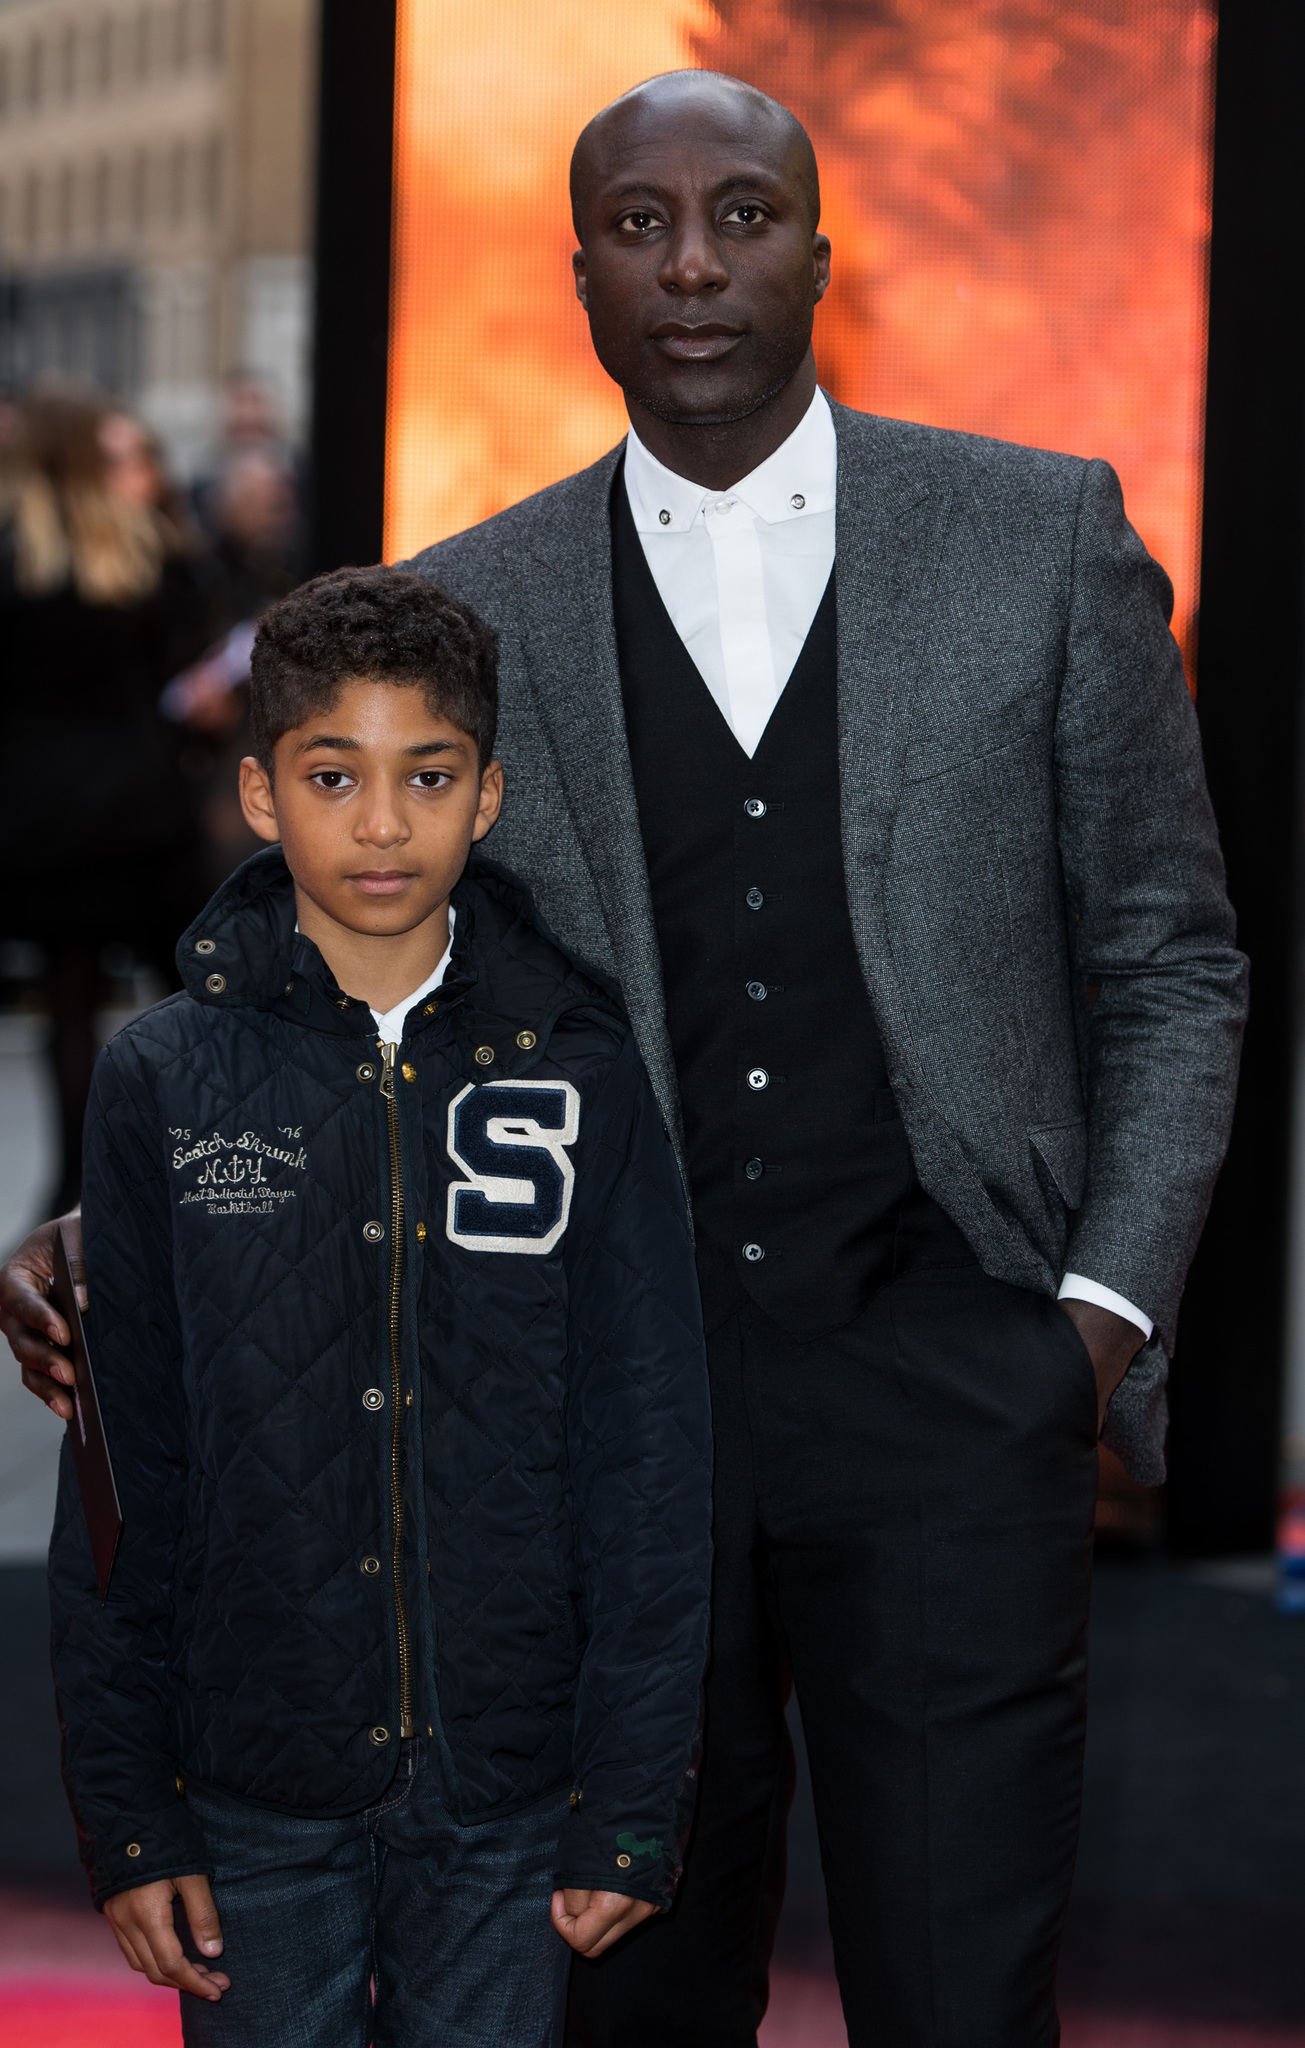 Ozwald Boateng and his son Oscar Boateng attends the European premiere of 